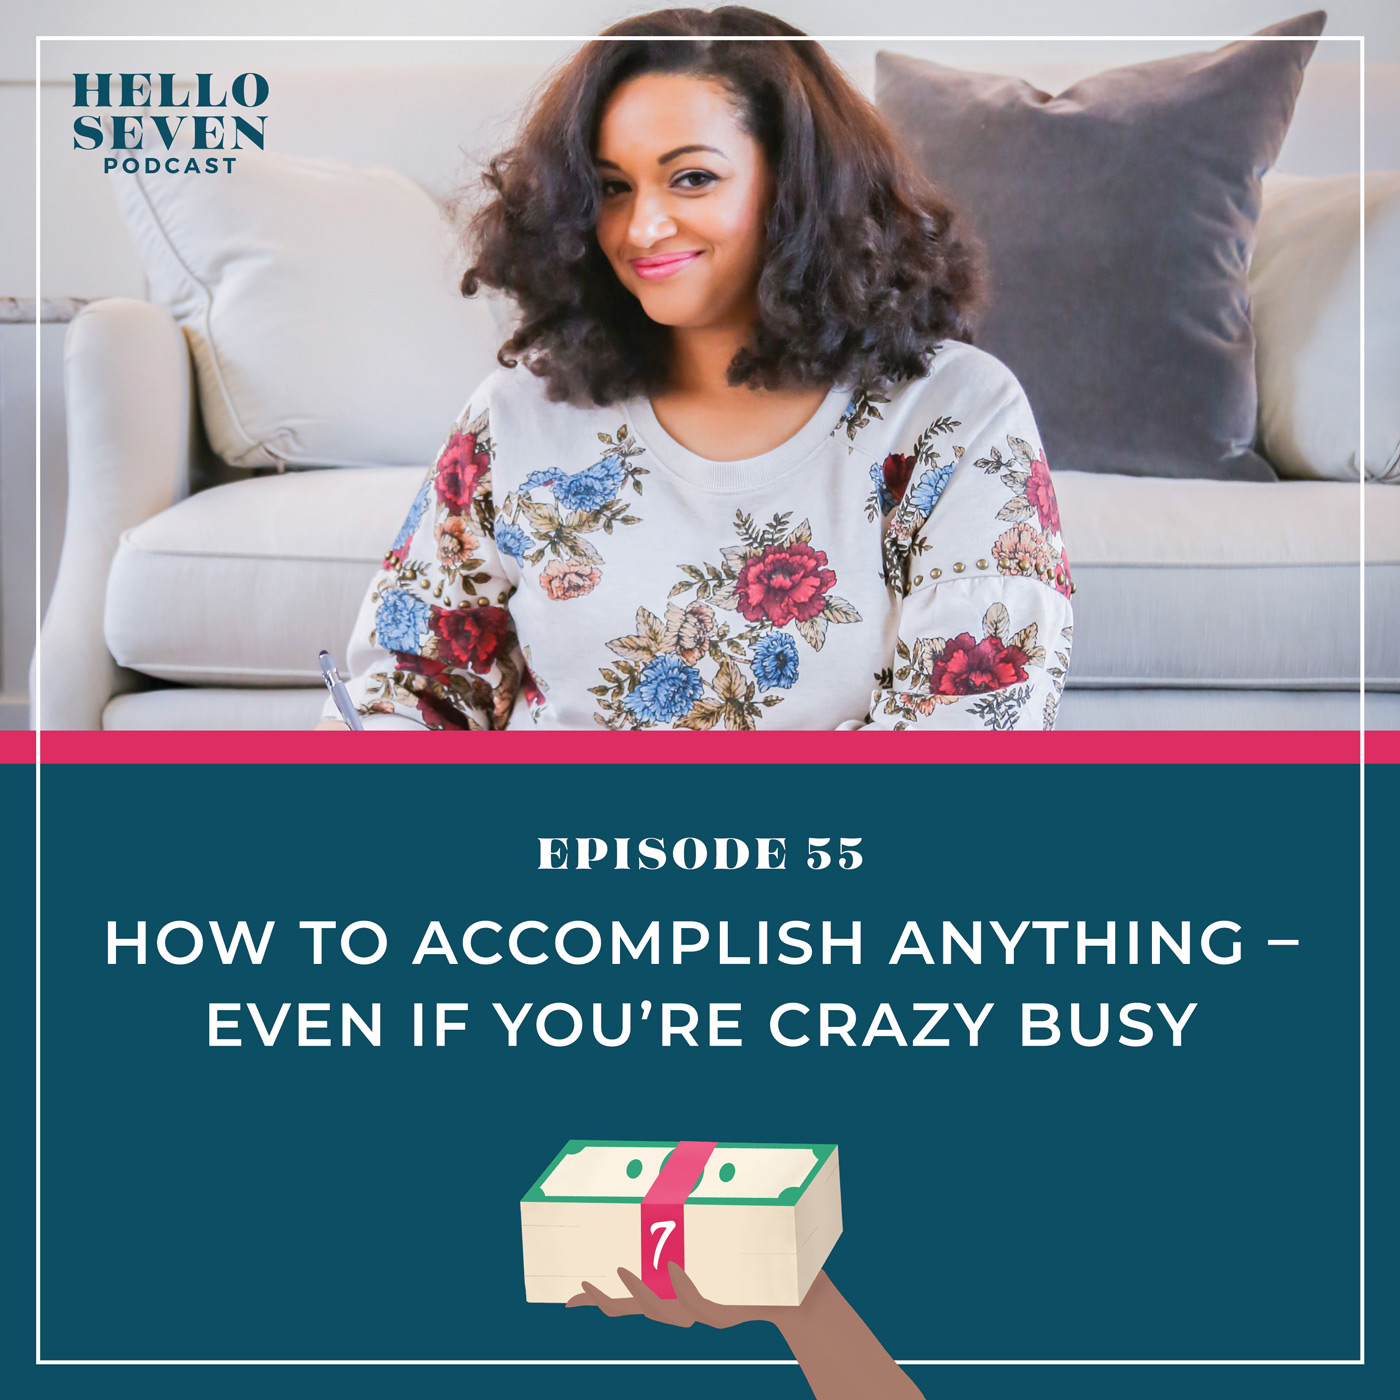 How to Accomplish ANYTHING – Even If You’re Crazy Busy